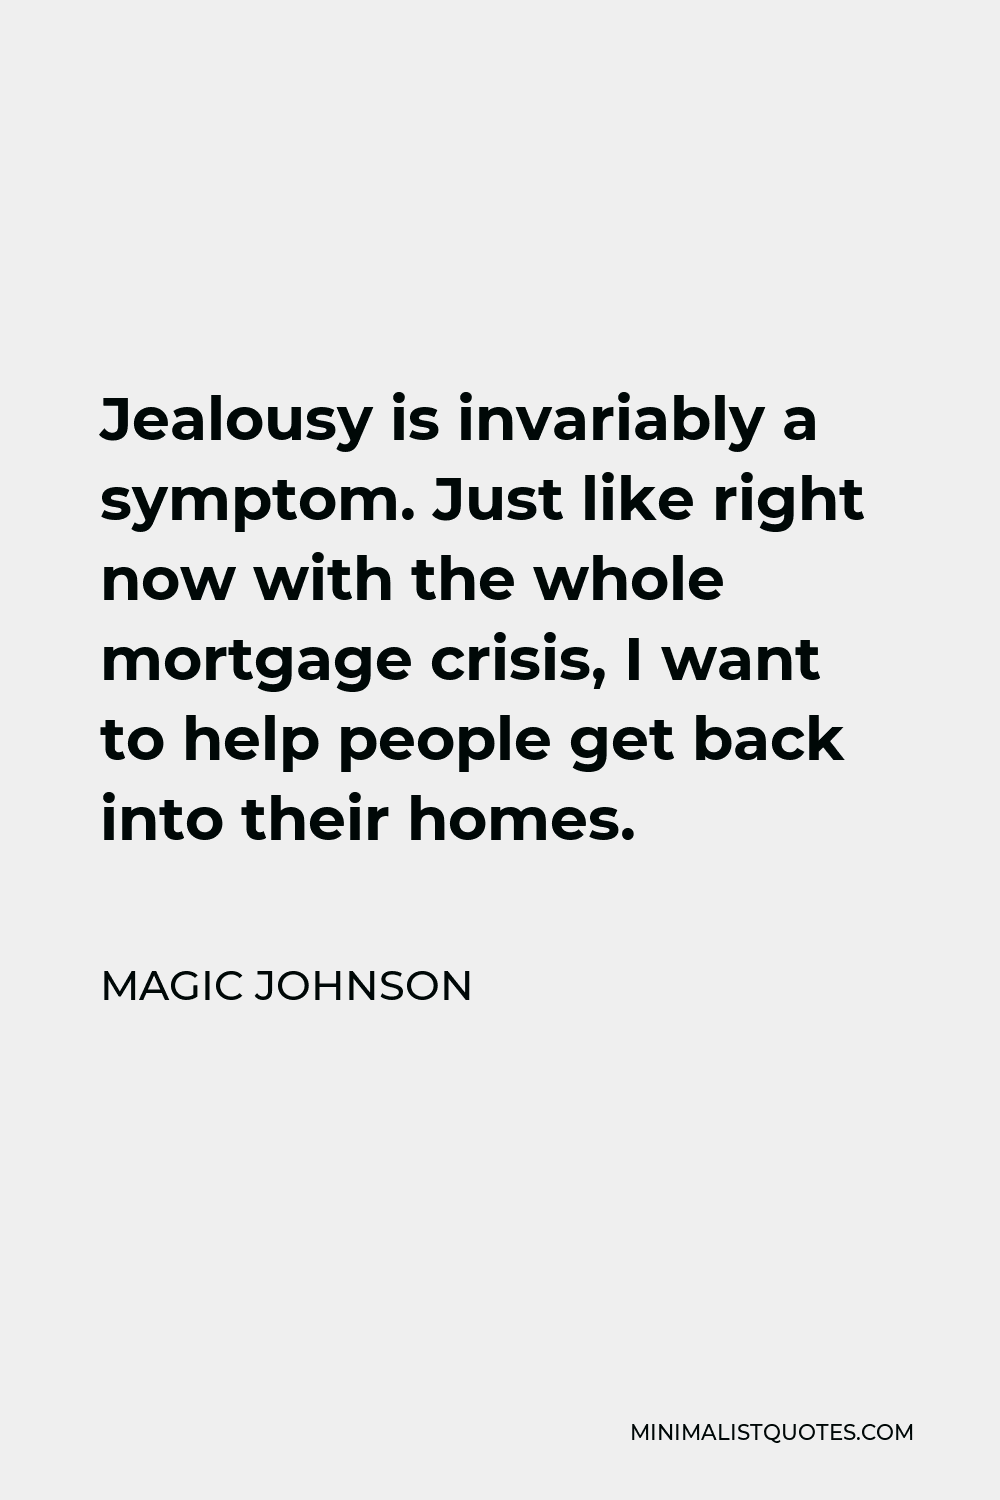 Magic Johnson Quote - Jealousy is invariably a symptom. Just like right now with the whole mortgage crisis, I want to help people get back into their homes.